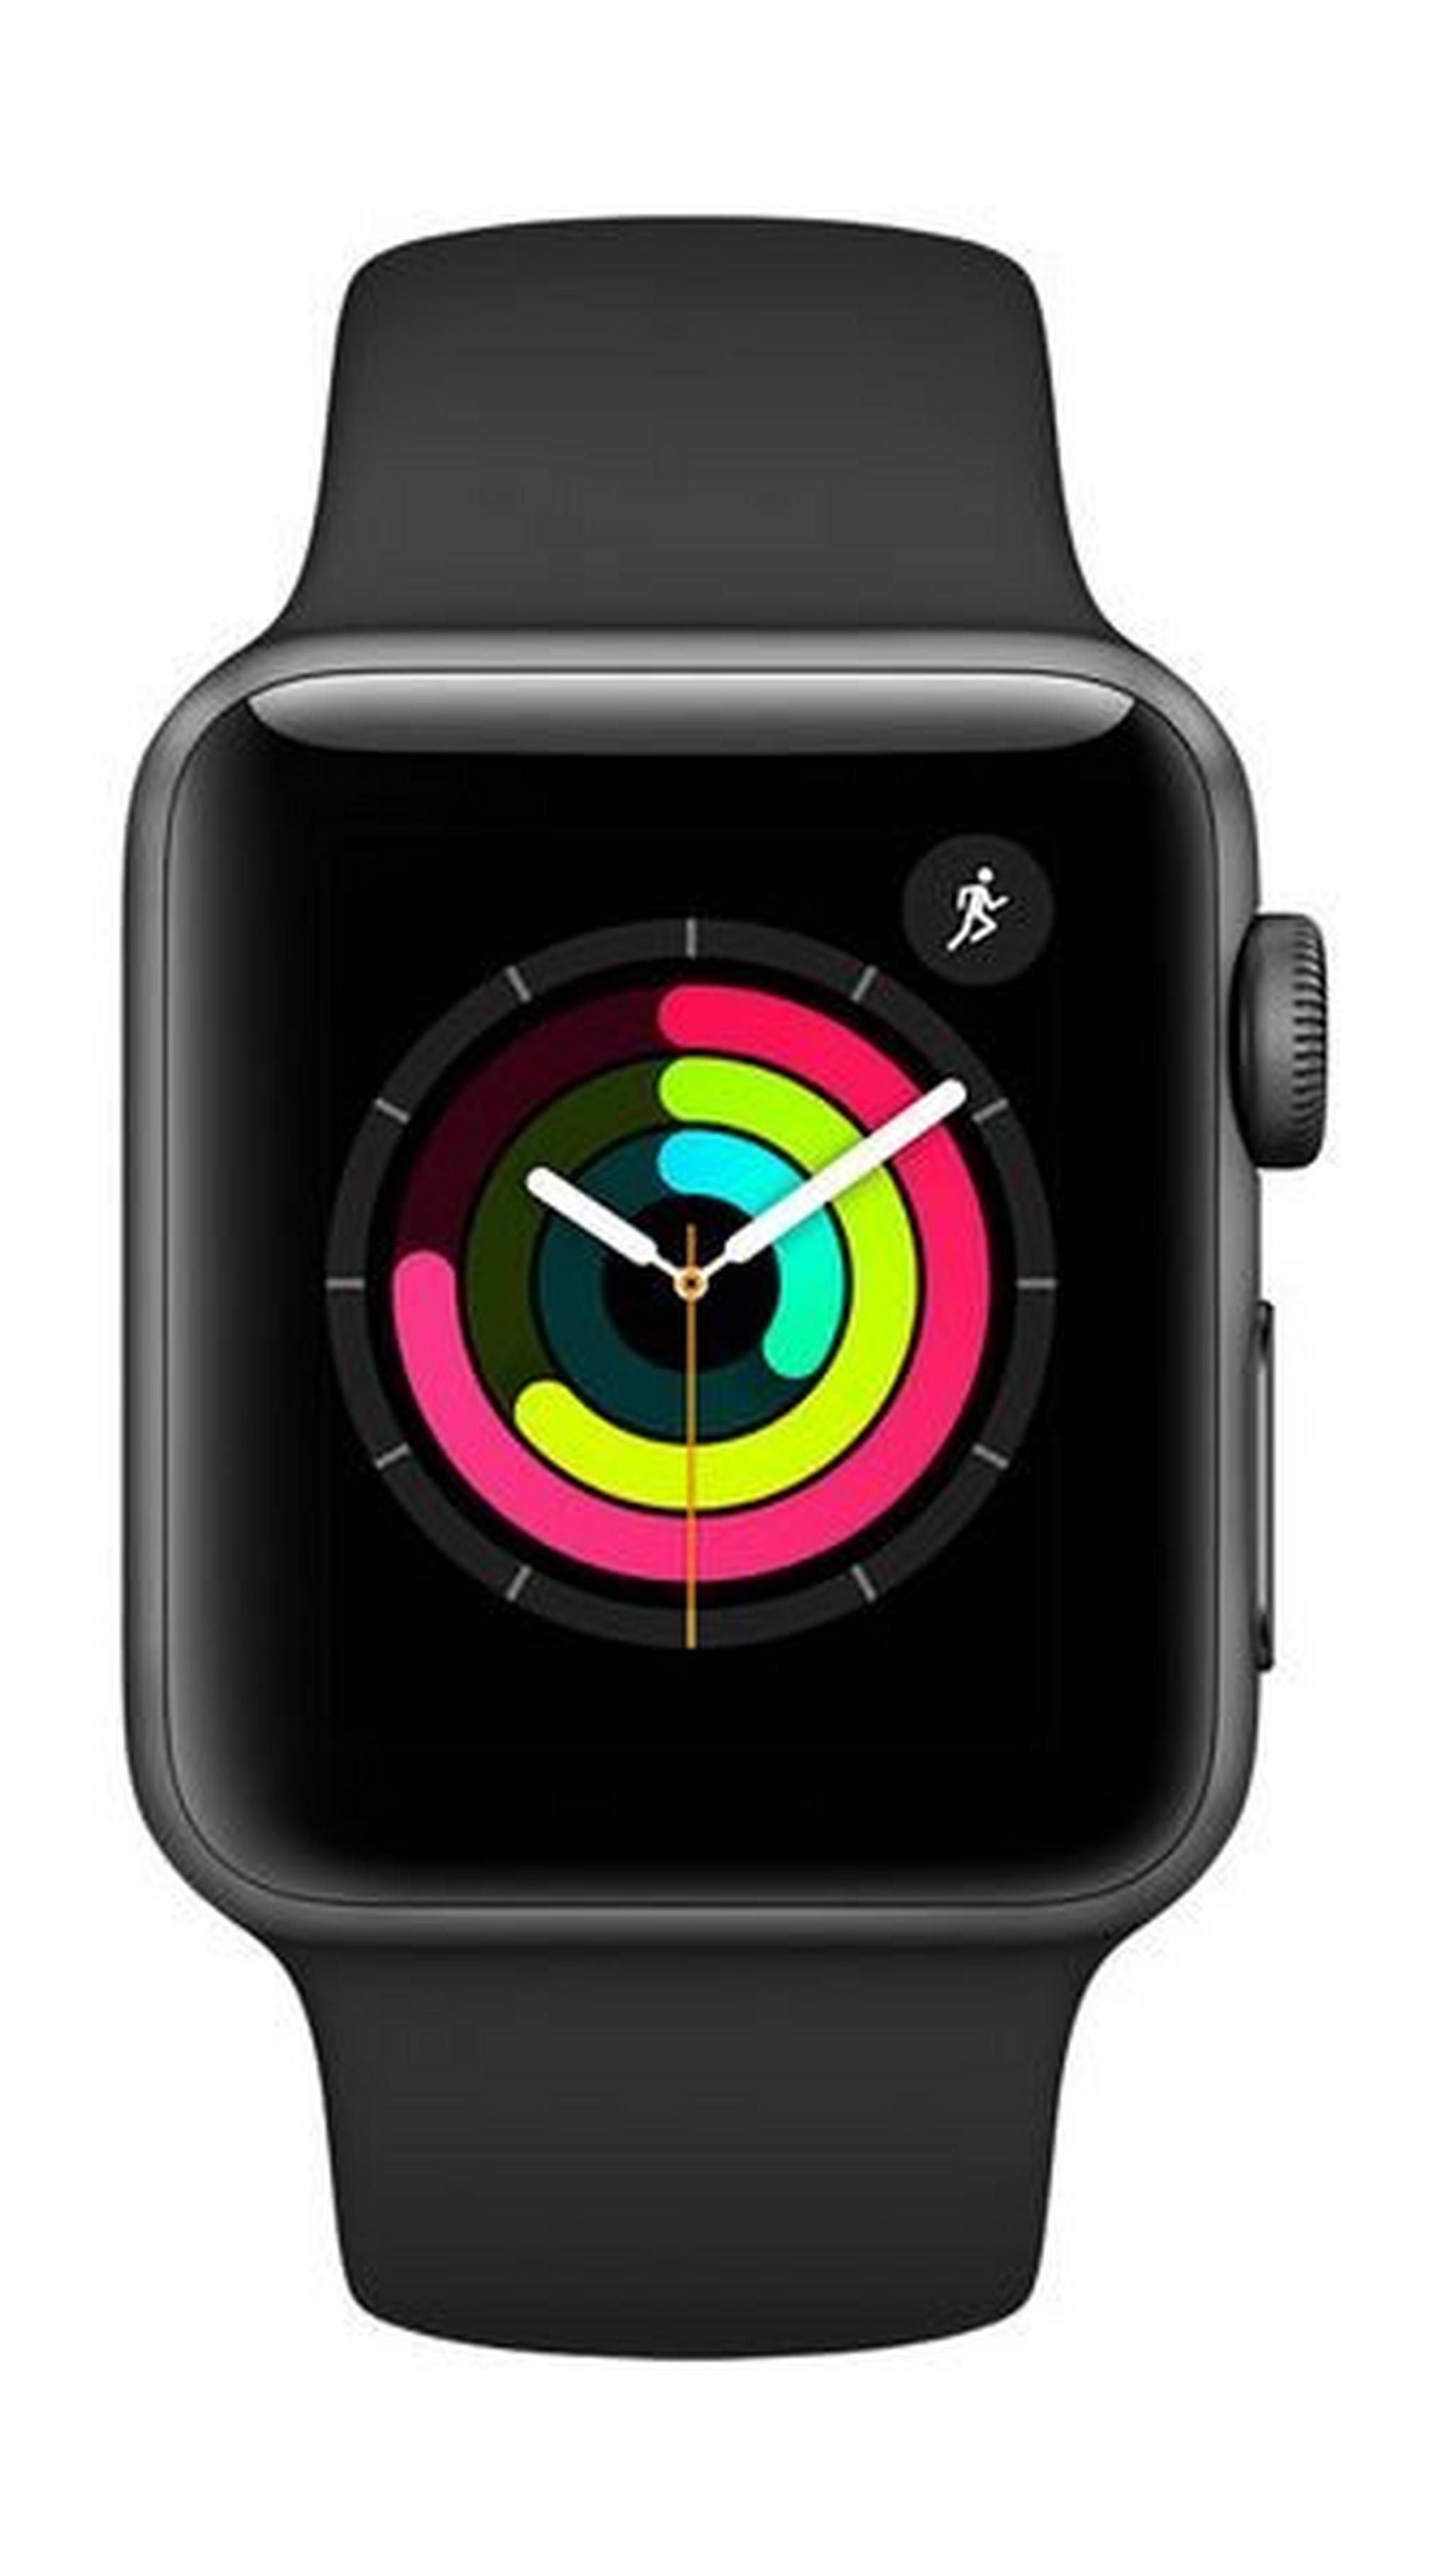 Apple Watch Series 3 42mm Space Gray Aluminum Case, Gray Sport Band Smartwatch - MR362LL/A